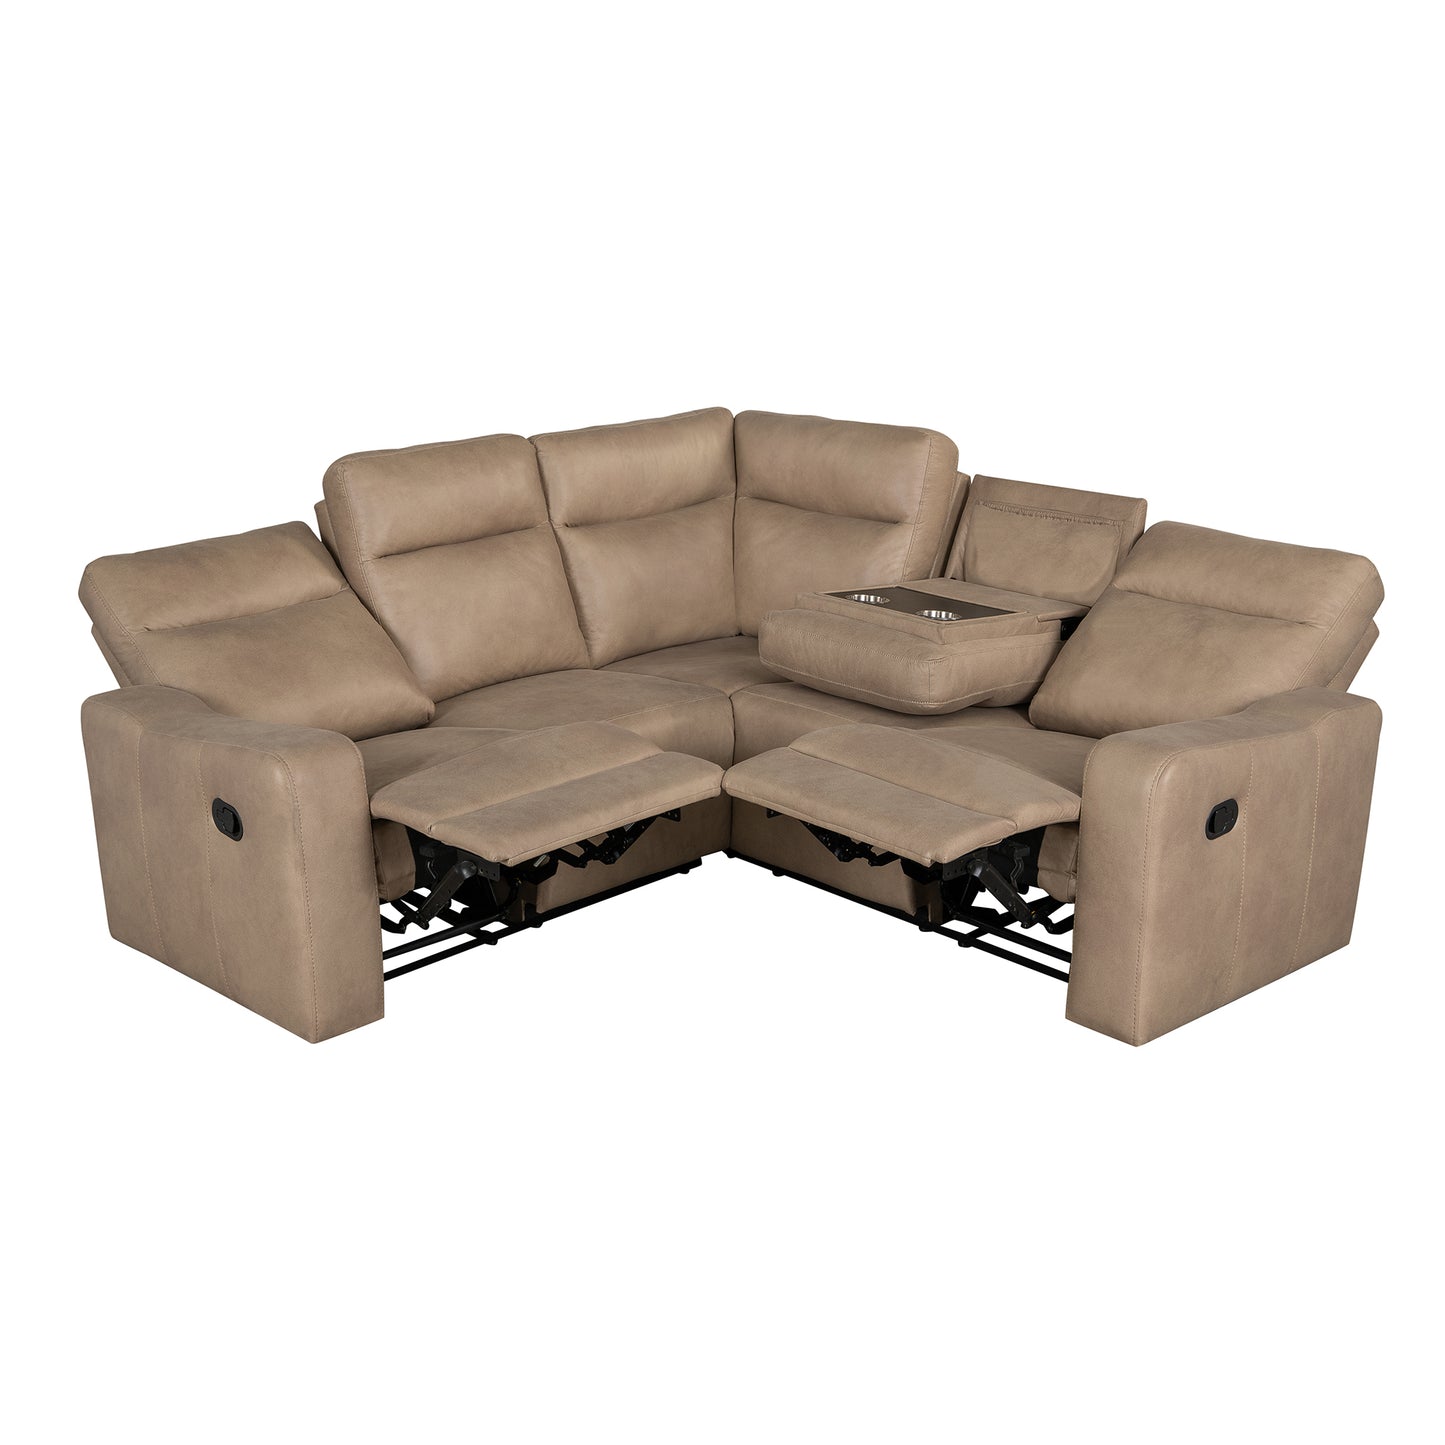 87.5" Manual Reclining Home Theater Seating Recliner Chair Sofa with Flipped Middle Backrest, 2 Cup Holders for Living Room, Bedroom, Home Theater, Light Brown